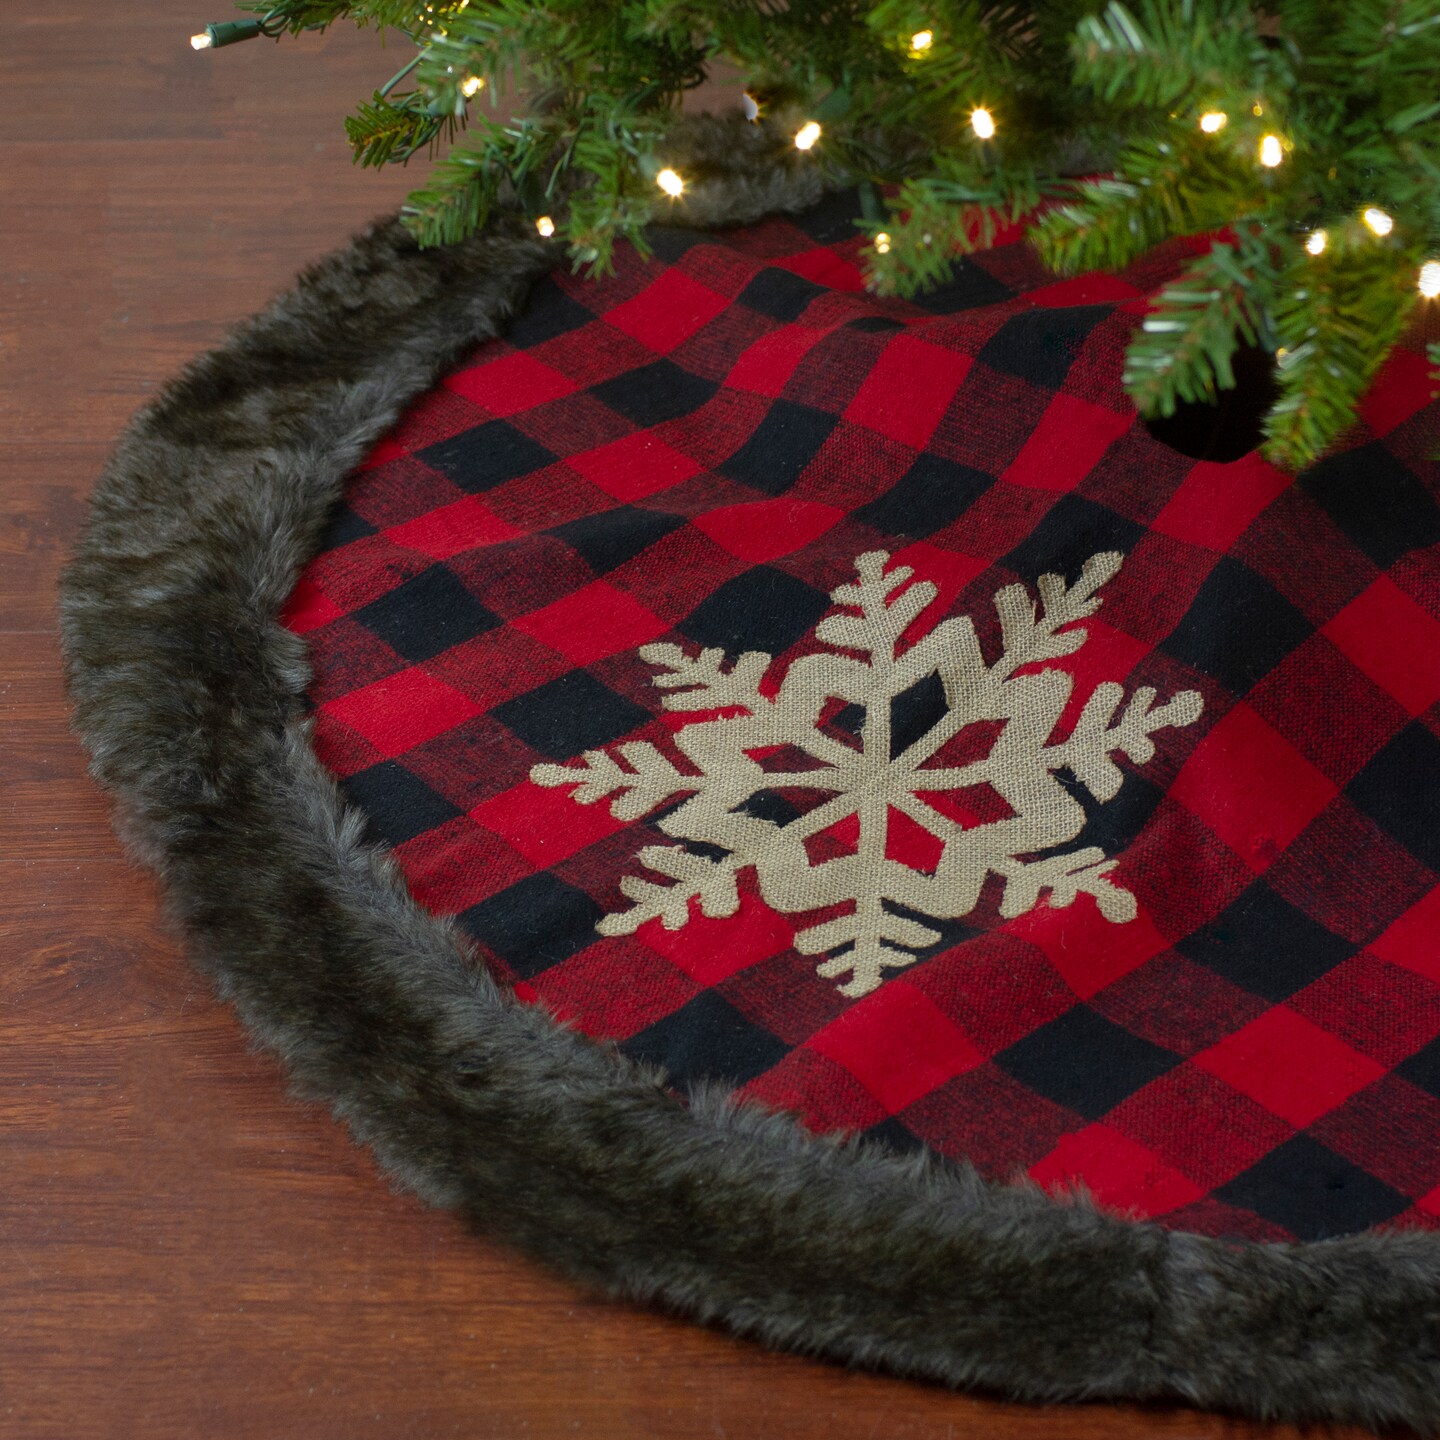 Northlight 48-Inch Red and Black Christmas Tree Skirt with Burlap Snowflake